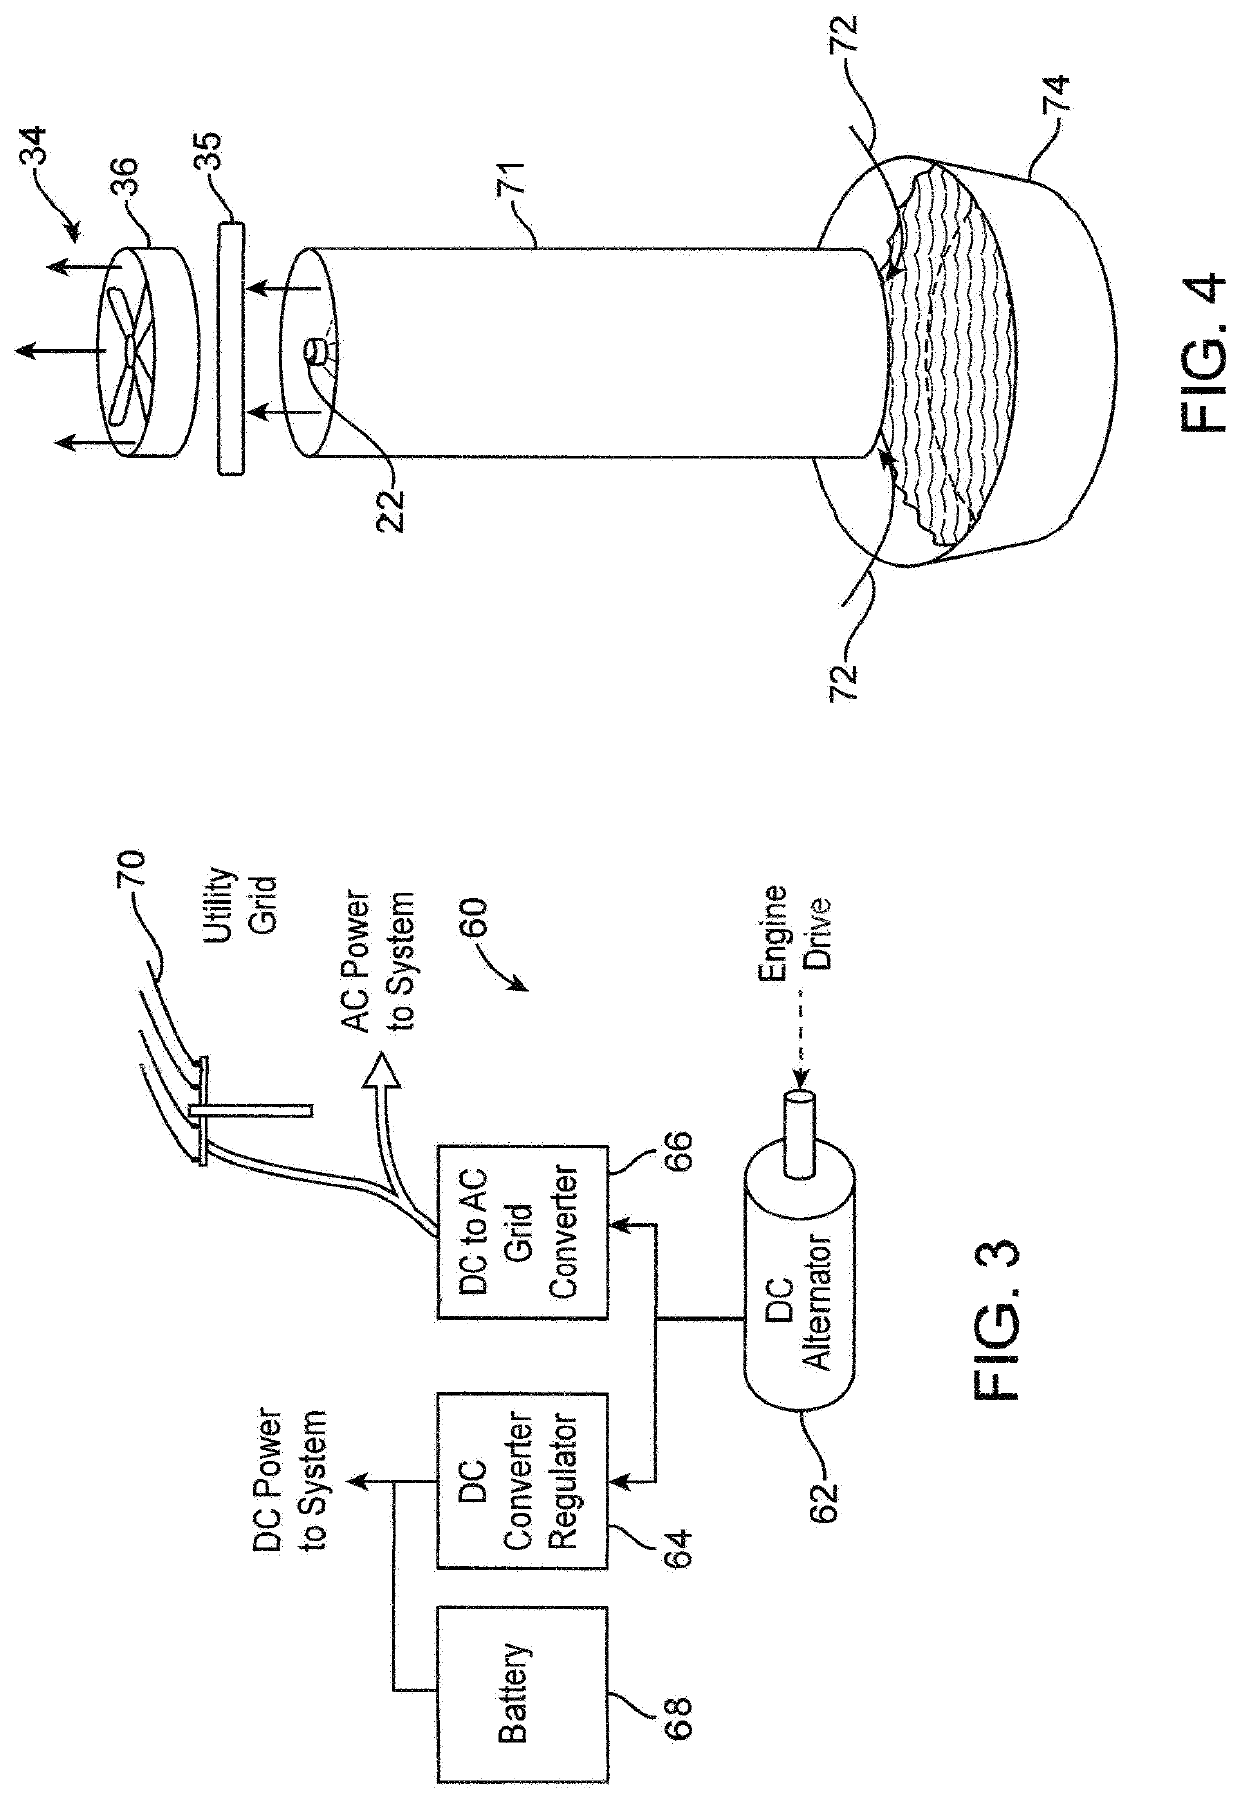 Water disposal system using an engine as a water heater